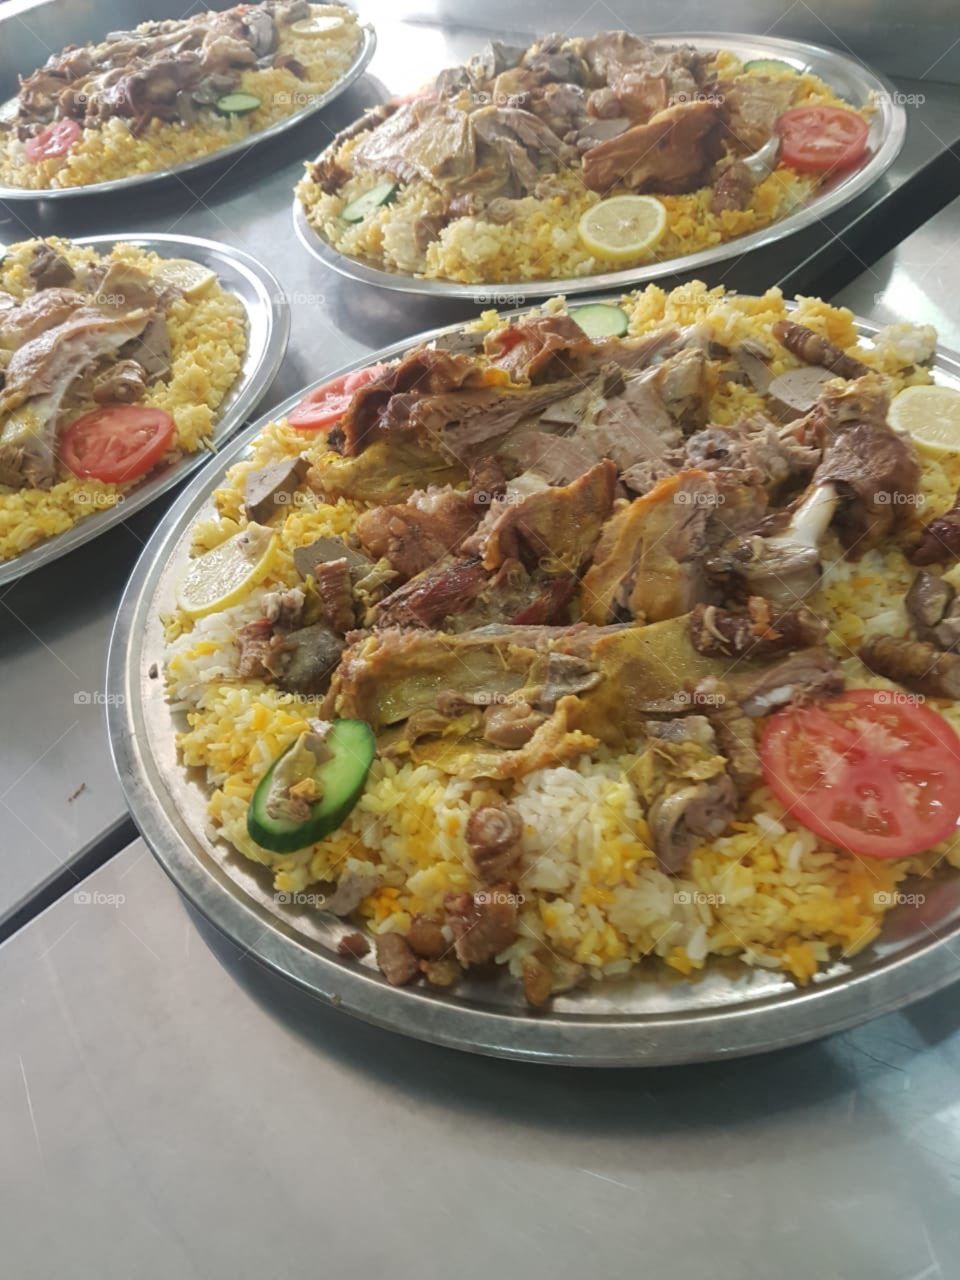 Laham Mandi or Lamb Mandi is a Saudi Arabian Traditional dish which is also very popular in other middle eastern countries like United Arab Emirates, Qatar, Kuwait, Oman and yemen. Rice made with special spices while lamb gets Roasted under the Soil.